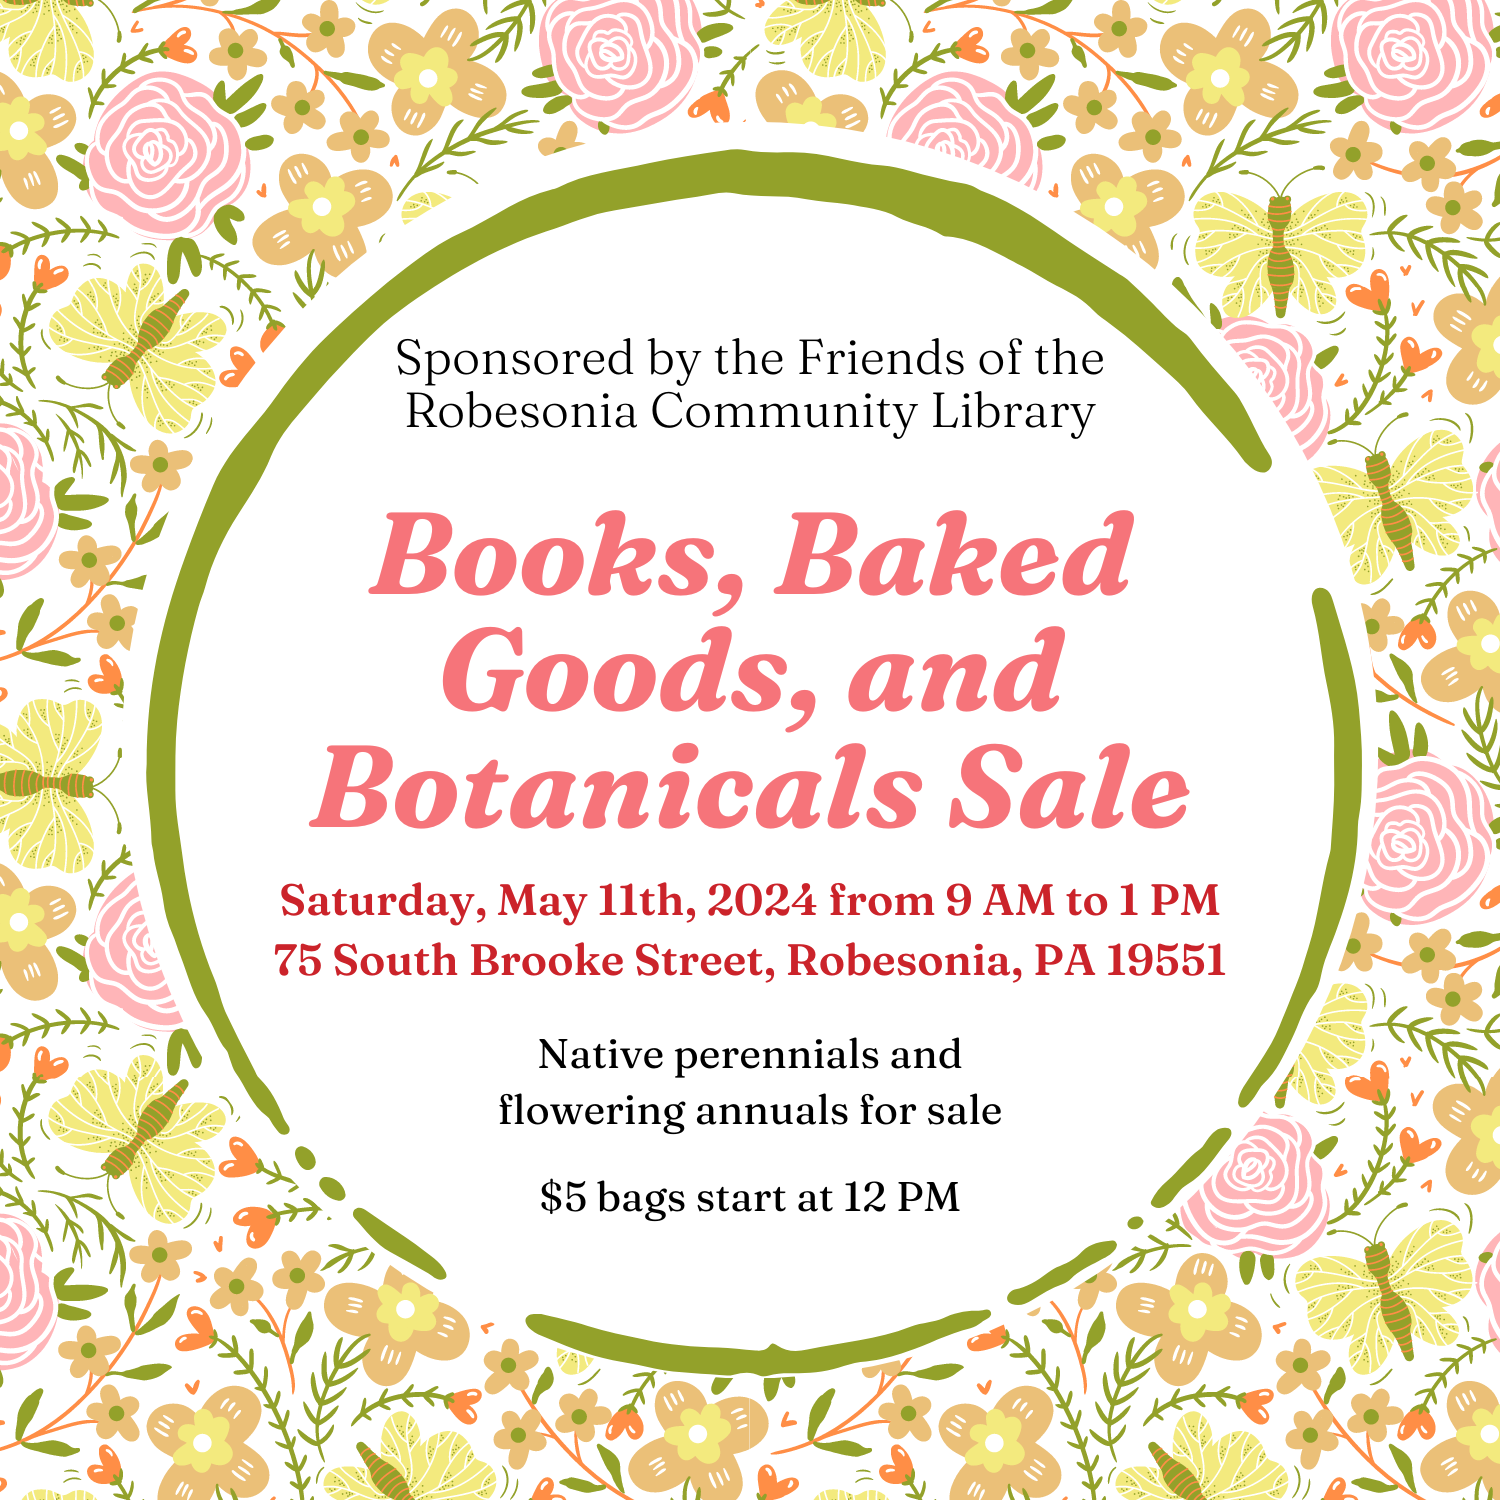 sponsored by the friends of the library. Books, baked good and Botanicals sale. Saturday May 11th 2024 from 9am to 1pm. 75 South Brooke Street, Robesonia PA 19551, Native Perennials and flowering annuals for sale. $5 bags start at 12pm